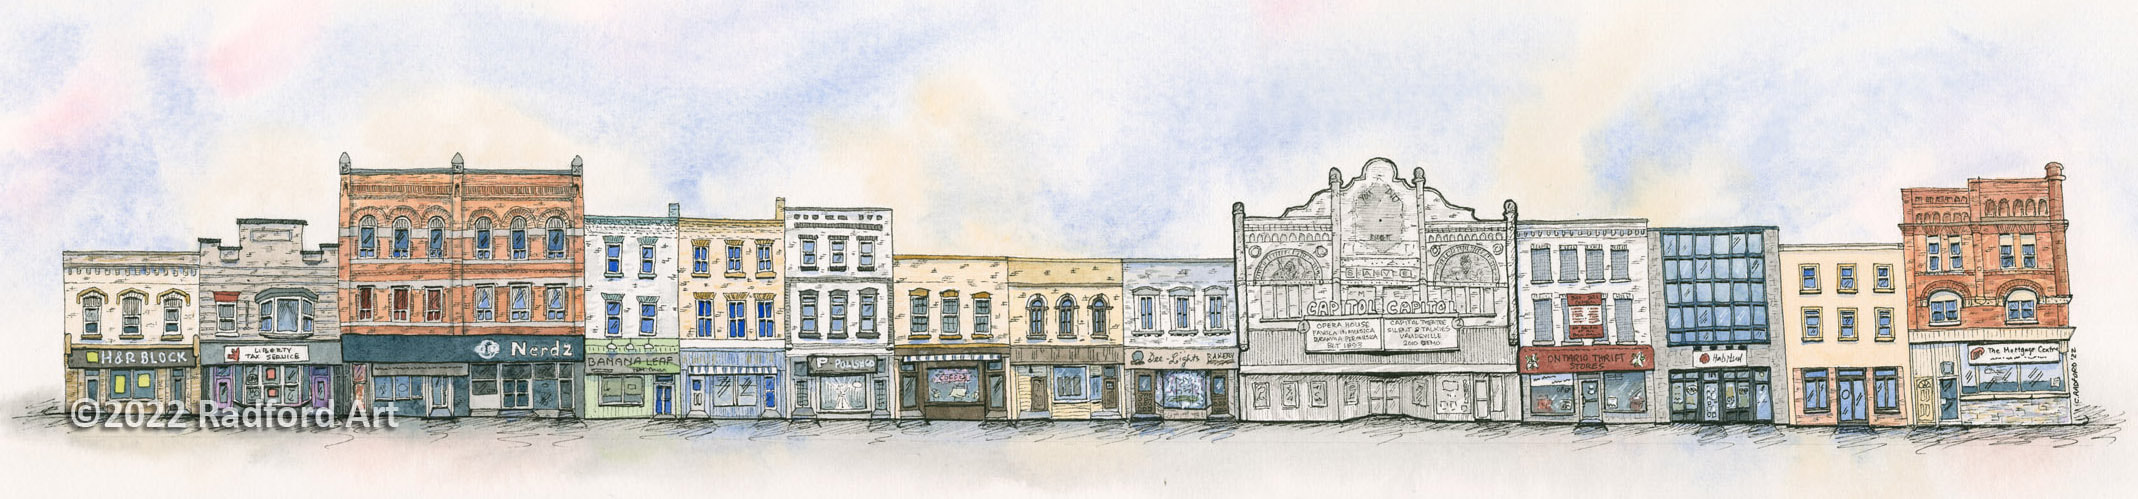 An illustration of Dundas Street in Woodstock Ontario with Capitol Theatre, by London ON artist Cheryl Radford.